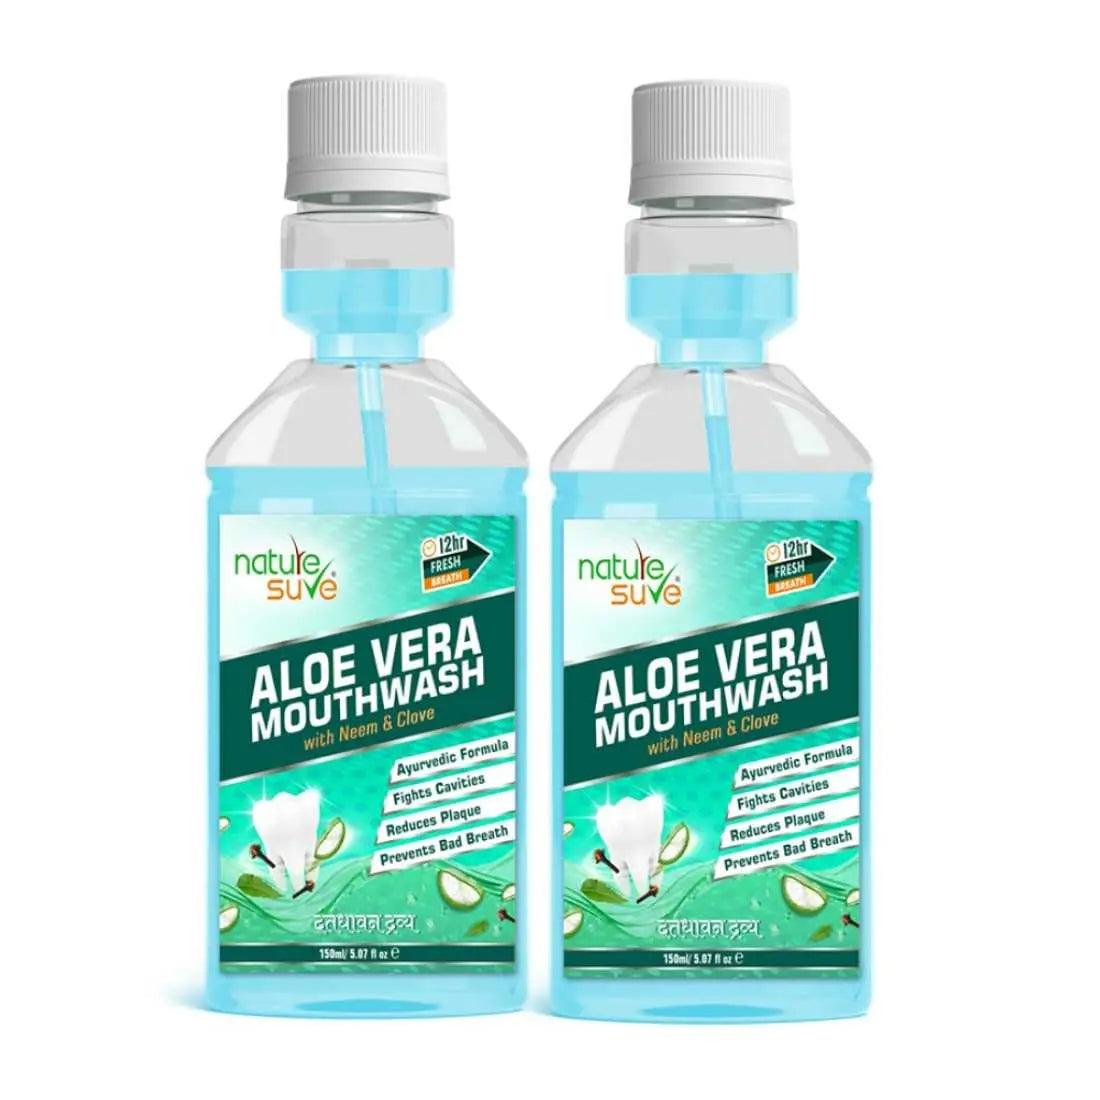 Nature Sure Aloe Vera Mouthwash with Neem and Clove Ayurvedic Formula for Oral Health in Men, Women & Kids 7419870784454